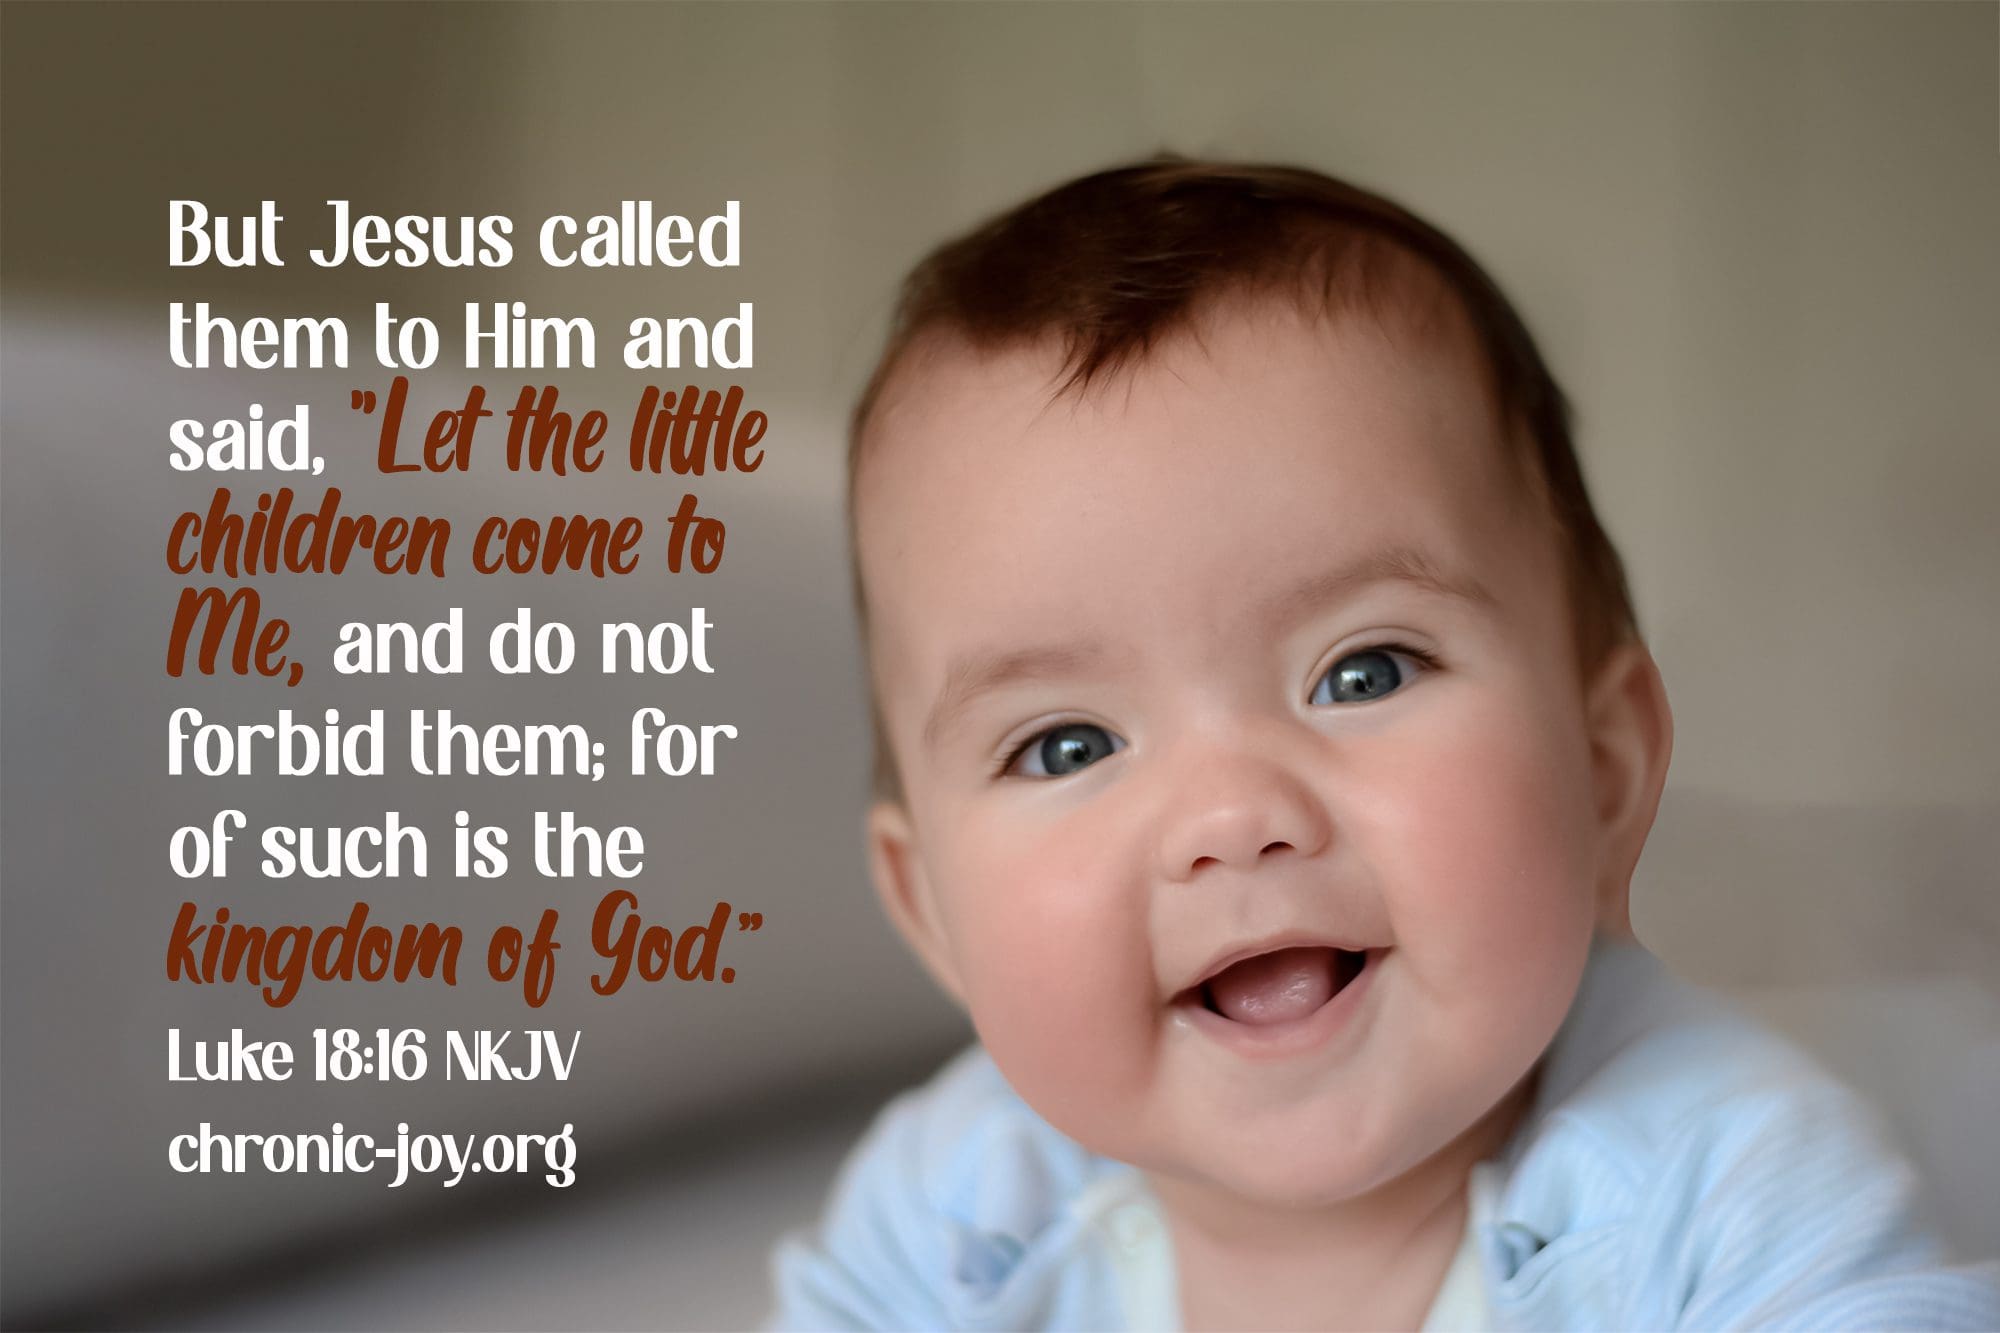 But Jesus called them to Him and said, “Let the little children come to Me, and do not forbid them; for of such is the kingdom of God.” (Luke 18:16 NKJV)